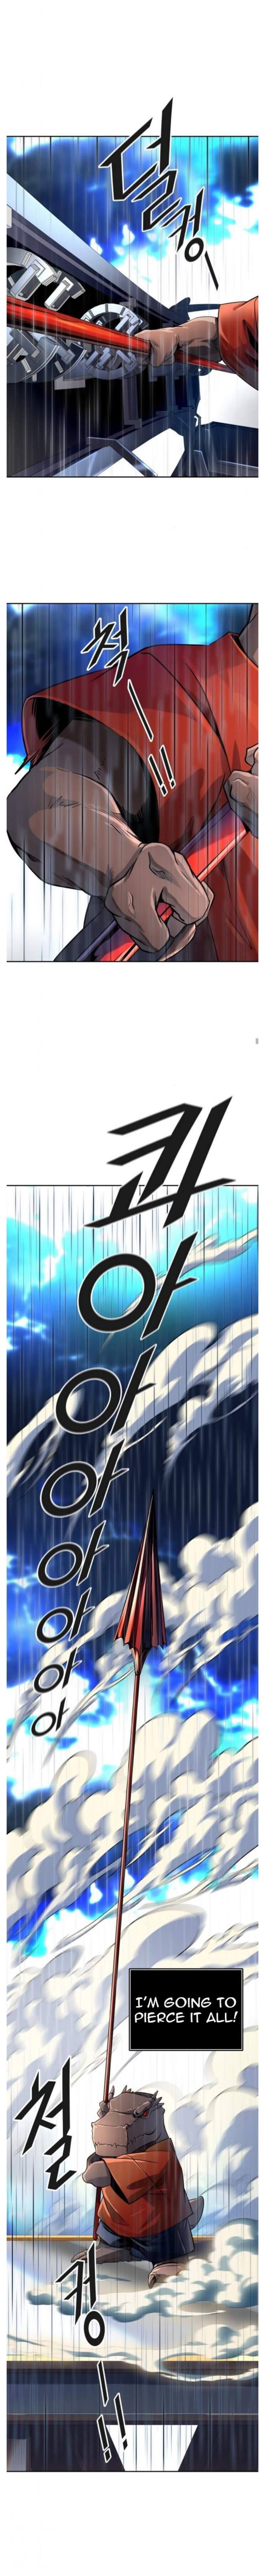 tower of god 511, tower of god 511, Read tower of god 511, tower of god 511 Manga, tower of god 511 english, tower of god 511 raw manga, tower of god 511 online, tower of god 511 high quality, tower of god 511 chapter, tower of god 511 manga scan